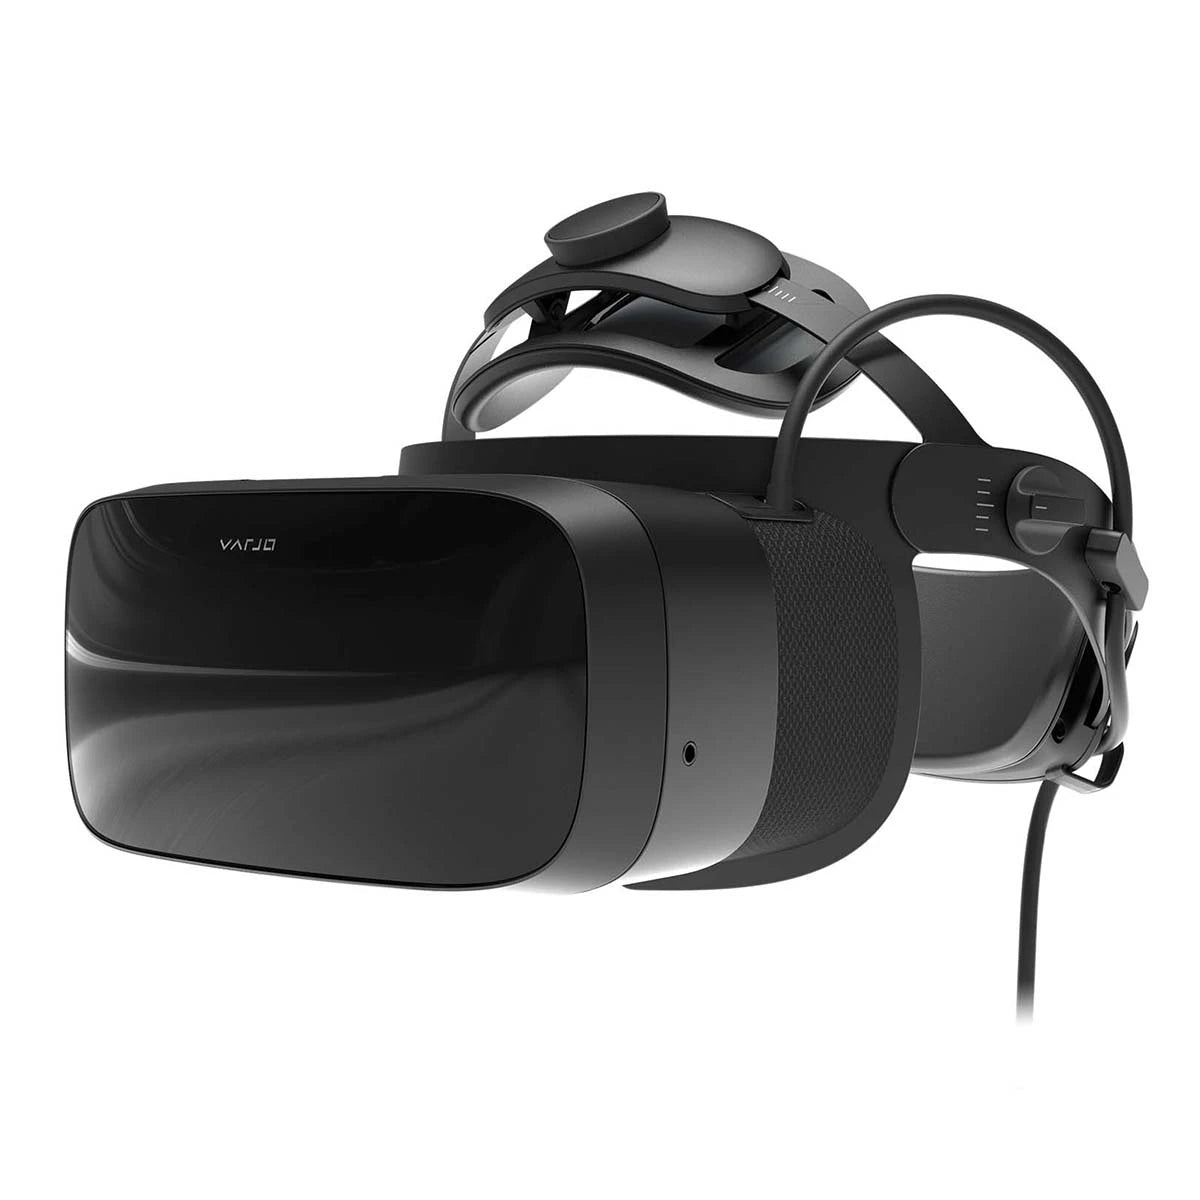 Varjo - Professional VR Headset | Ships in 1-3 business days | Knoxlabs VR Marketplace